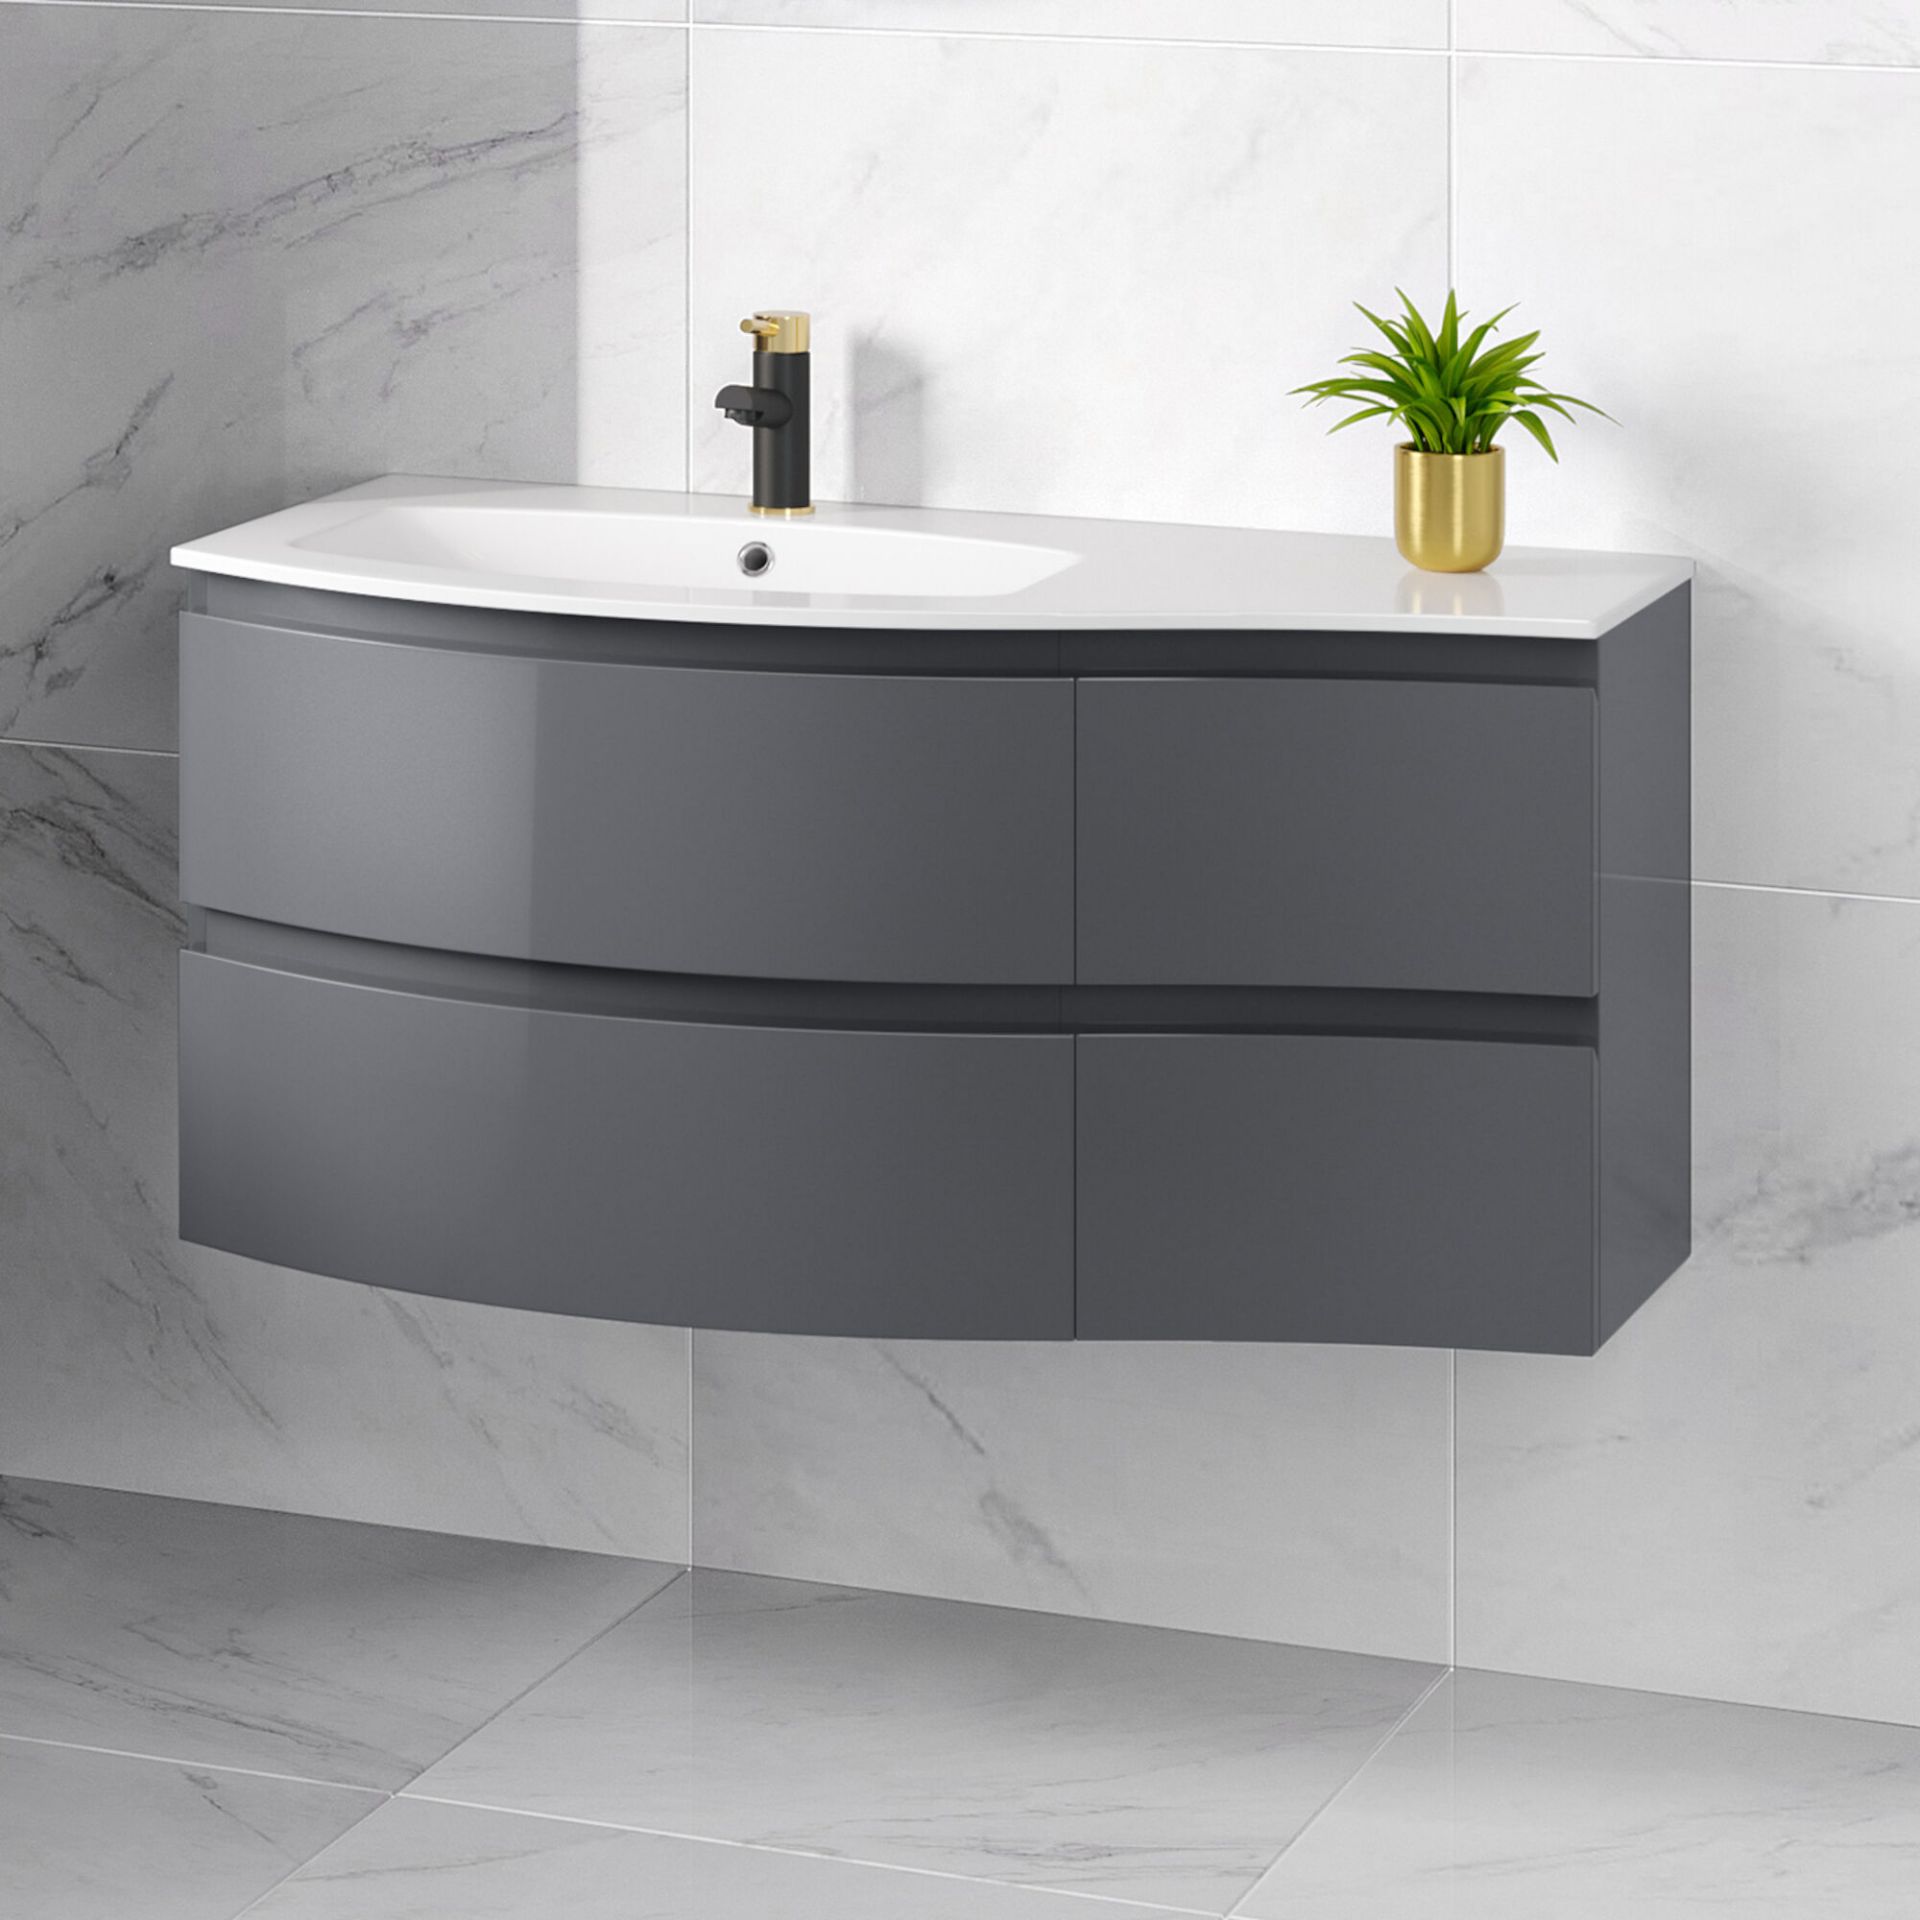 (G2) 1040mm Amelie Gloss Grey Curved Vanity Unit - Left Hand - Wall Hung.Comes complete with ba...